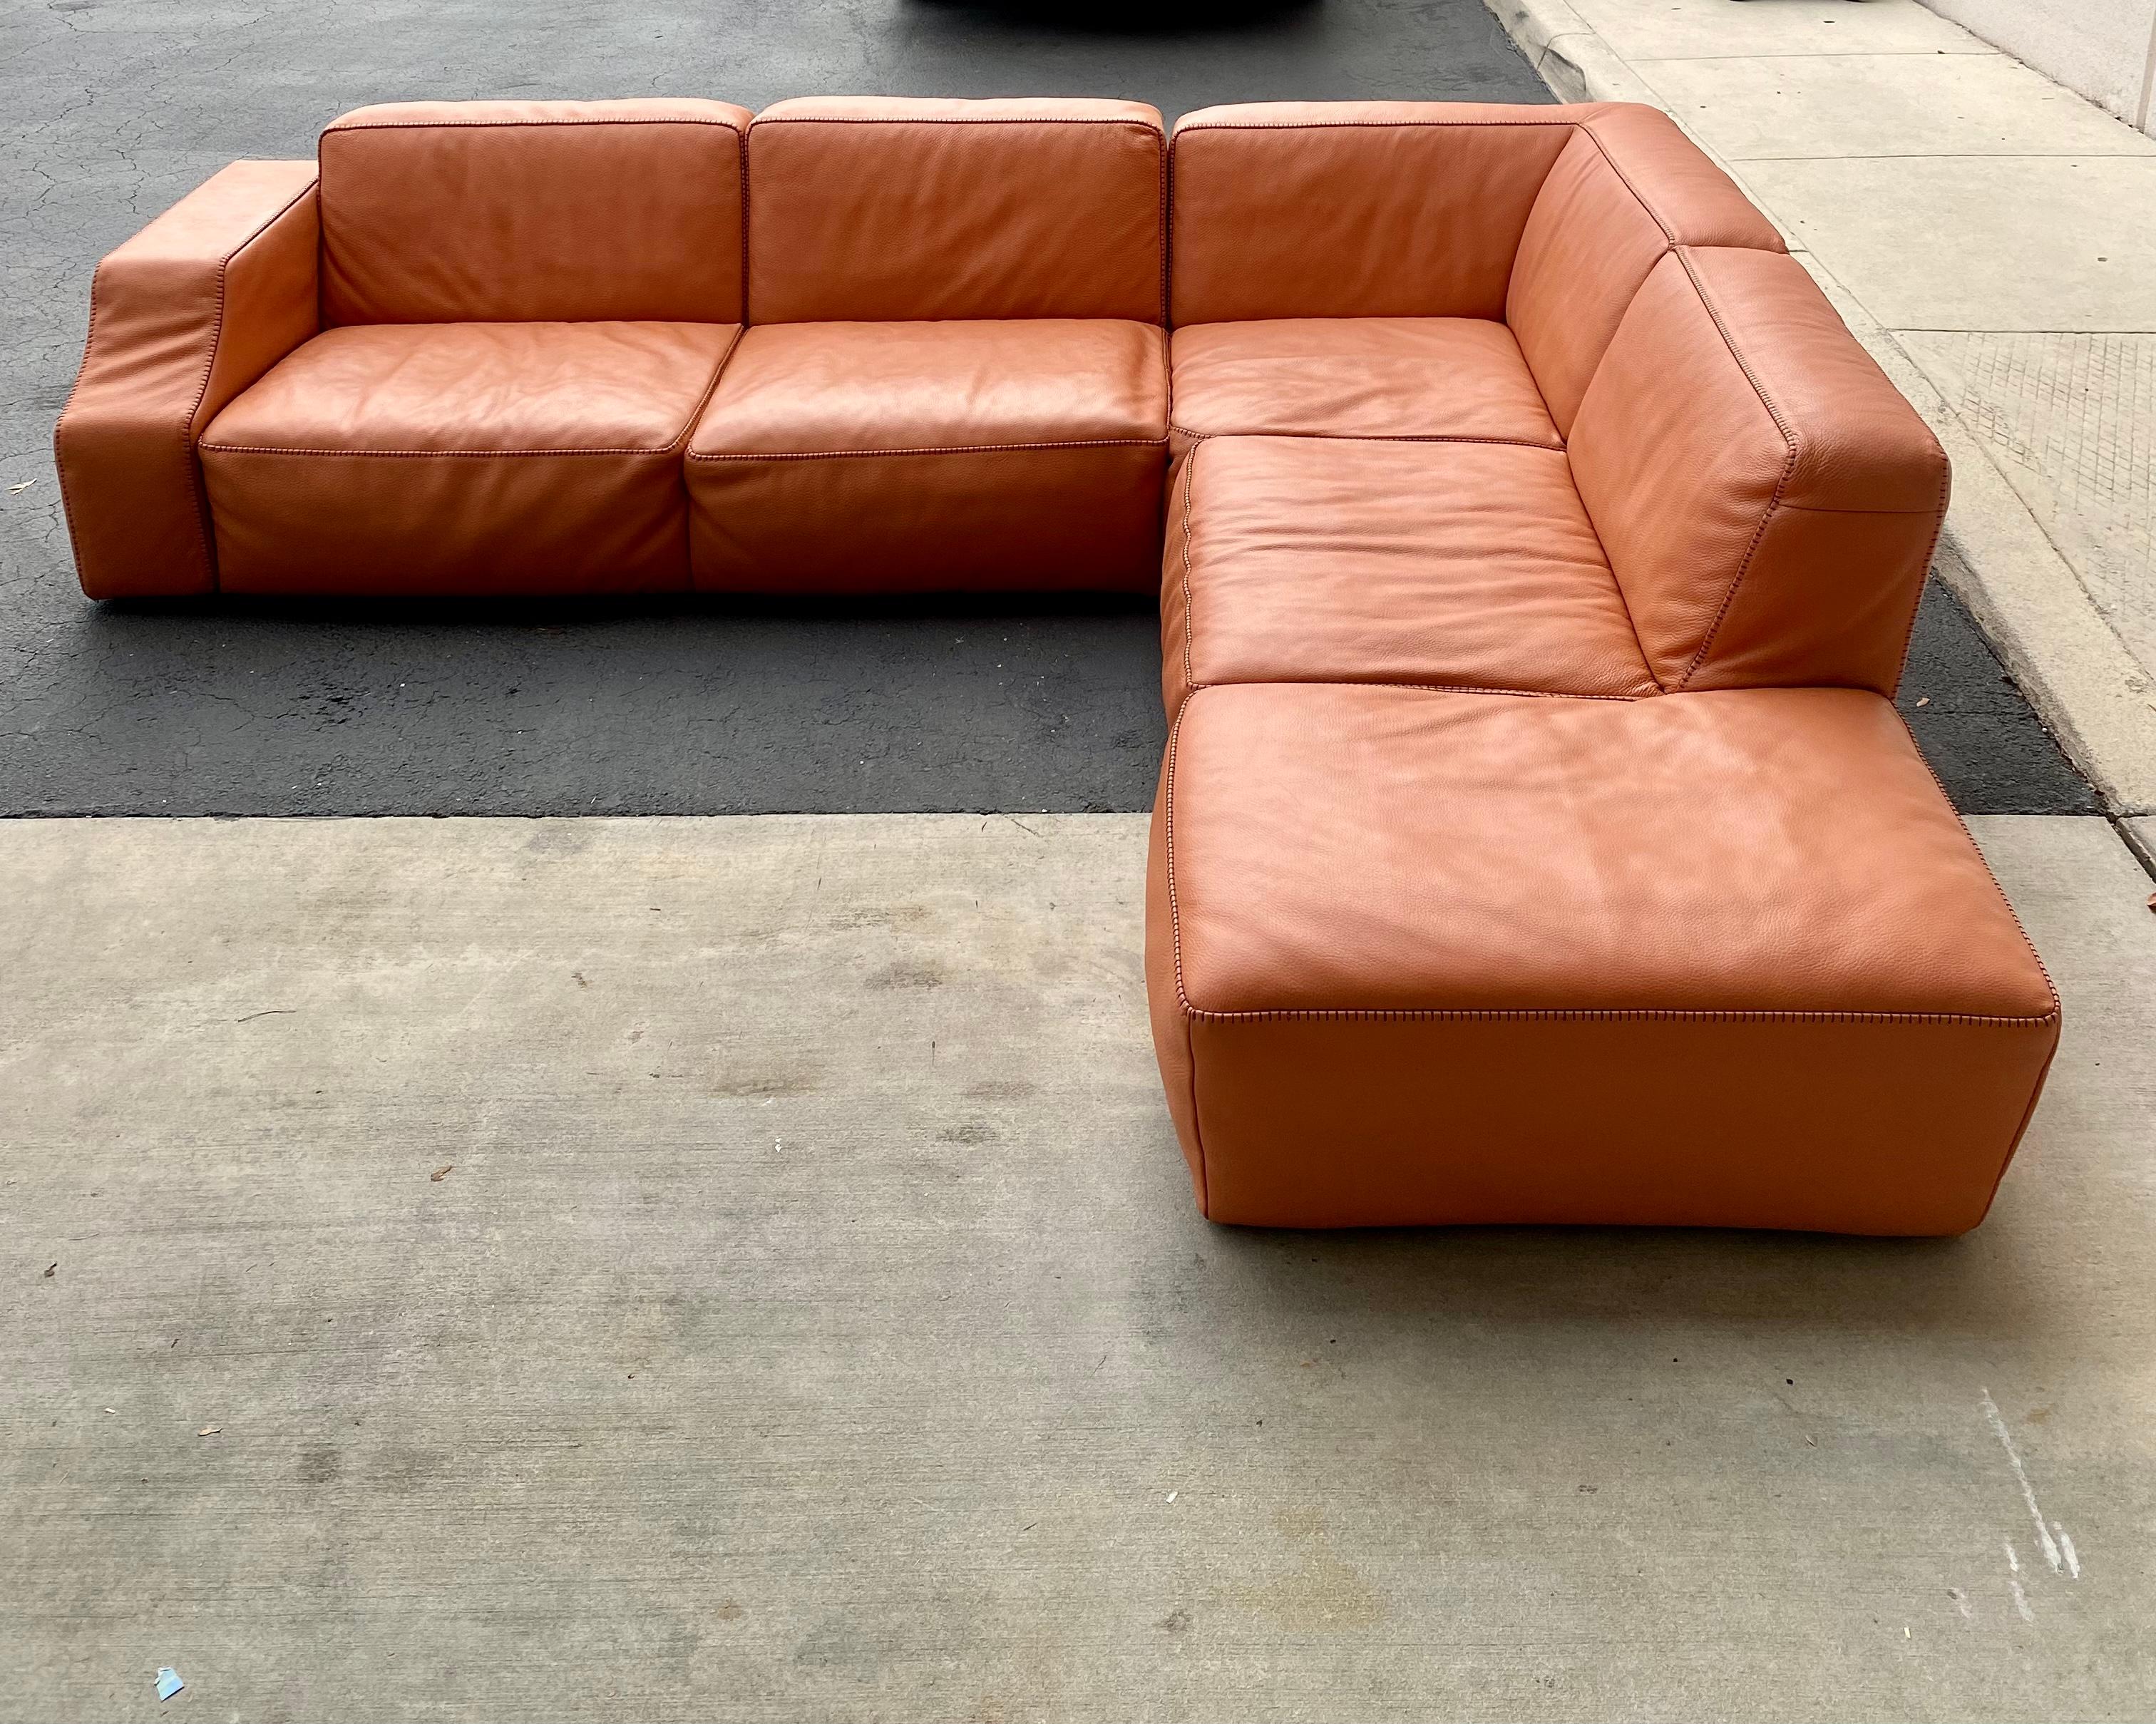 Perpetually trendy with angular lines that are starkly contrasted against the shapely, curved armrests, the Oxer corner sectional sofa with peninsula is an ideal choice for modern areas. Manufactured in Italy by Gamma Arredamenti, the sectional is a